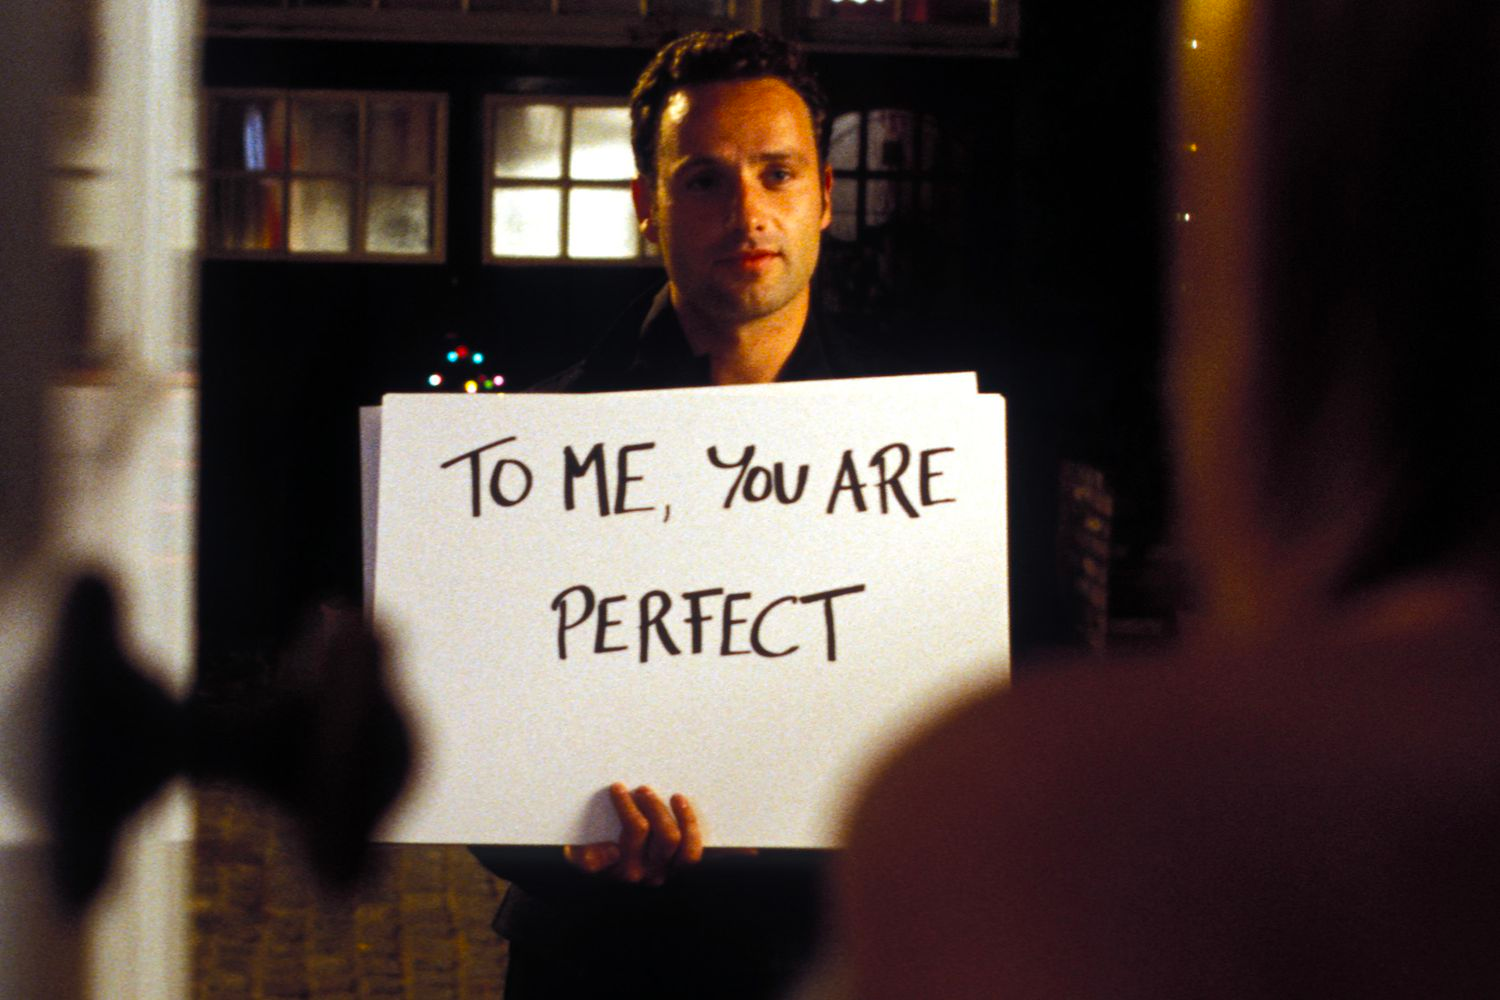 A character is holding a sign that says "To Me, You Are Perfect" in Love Actually.